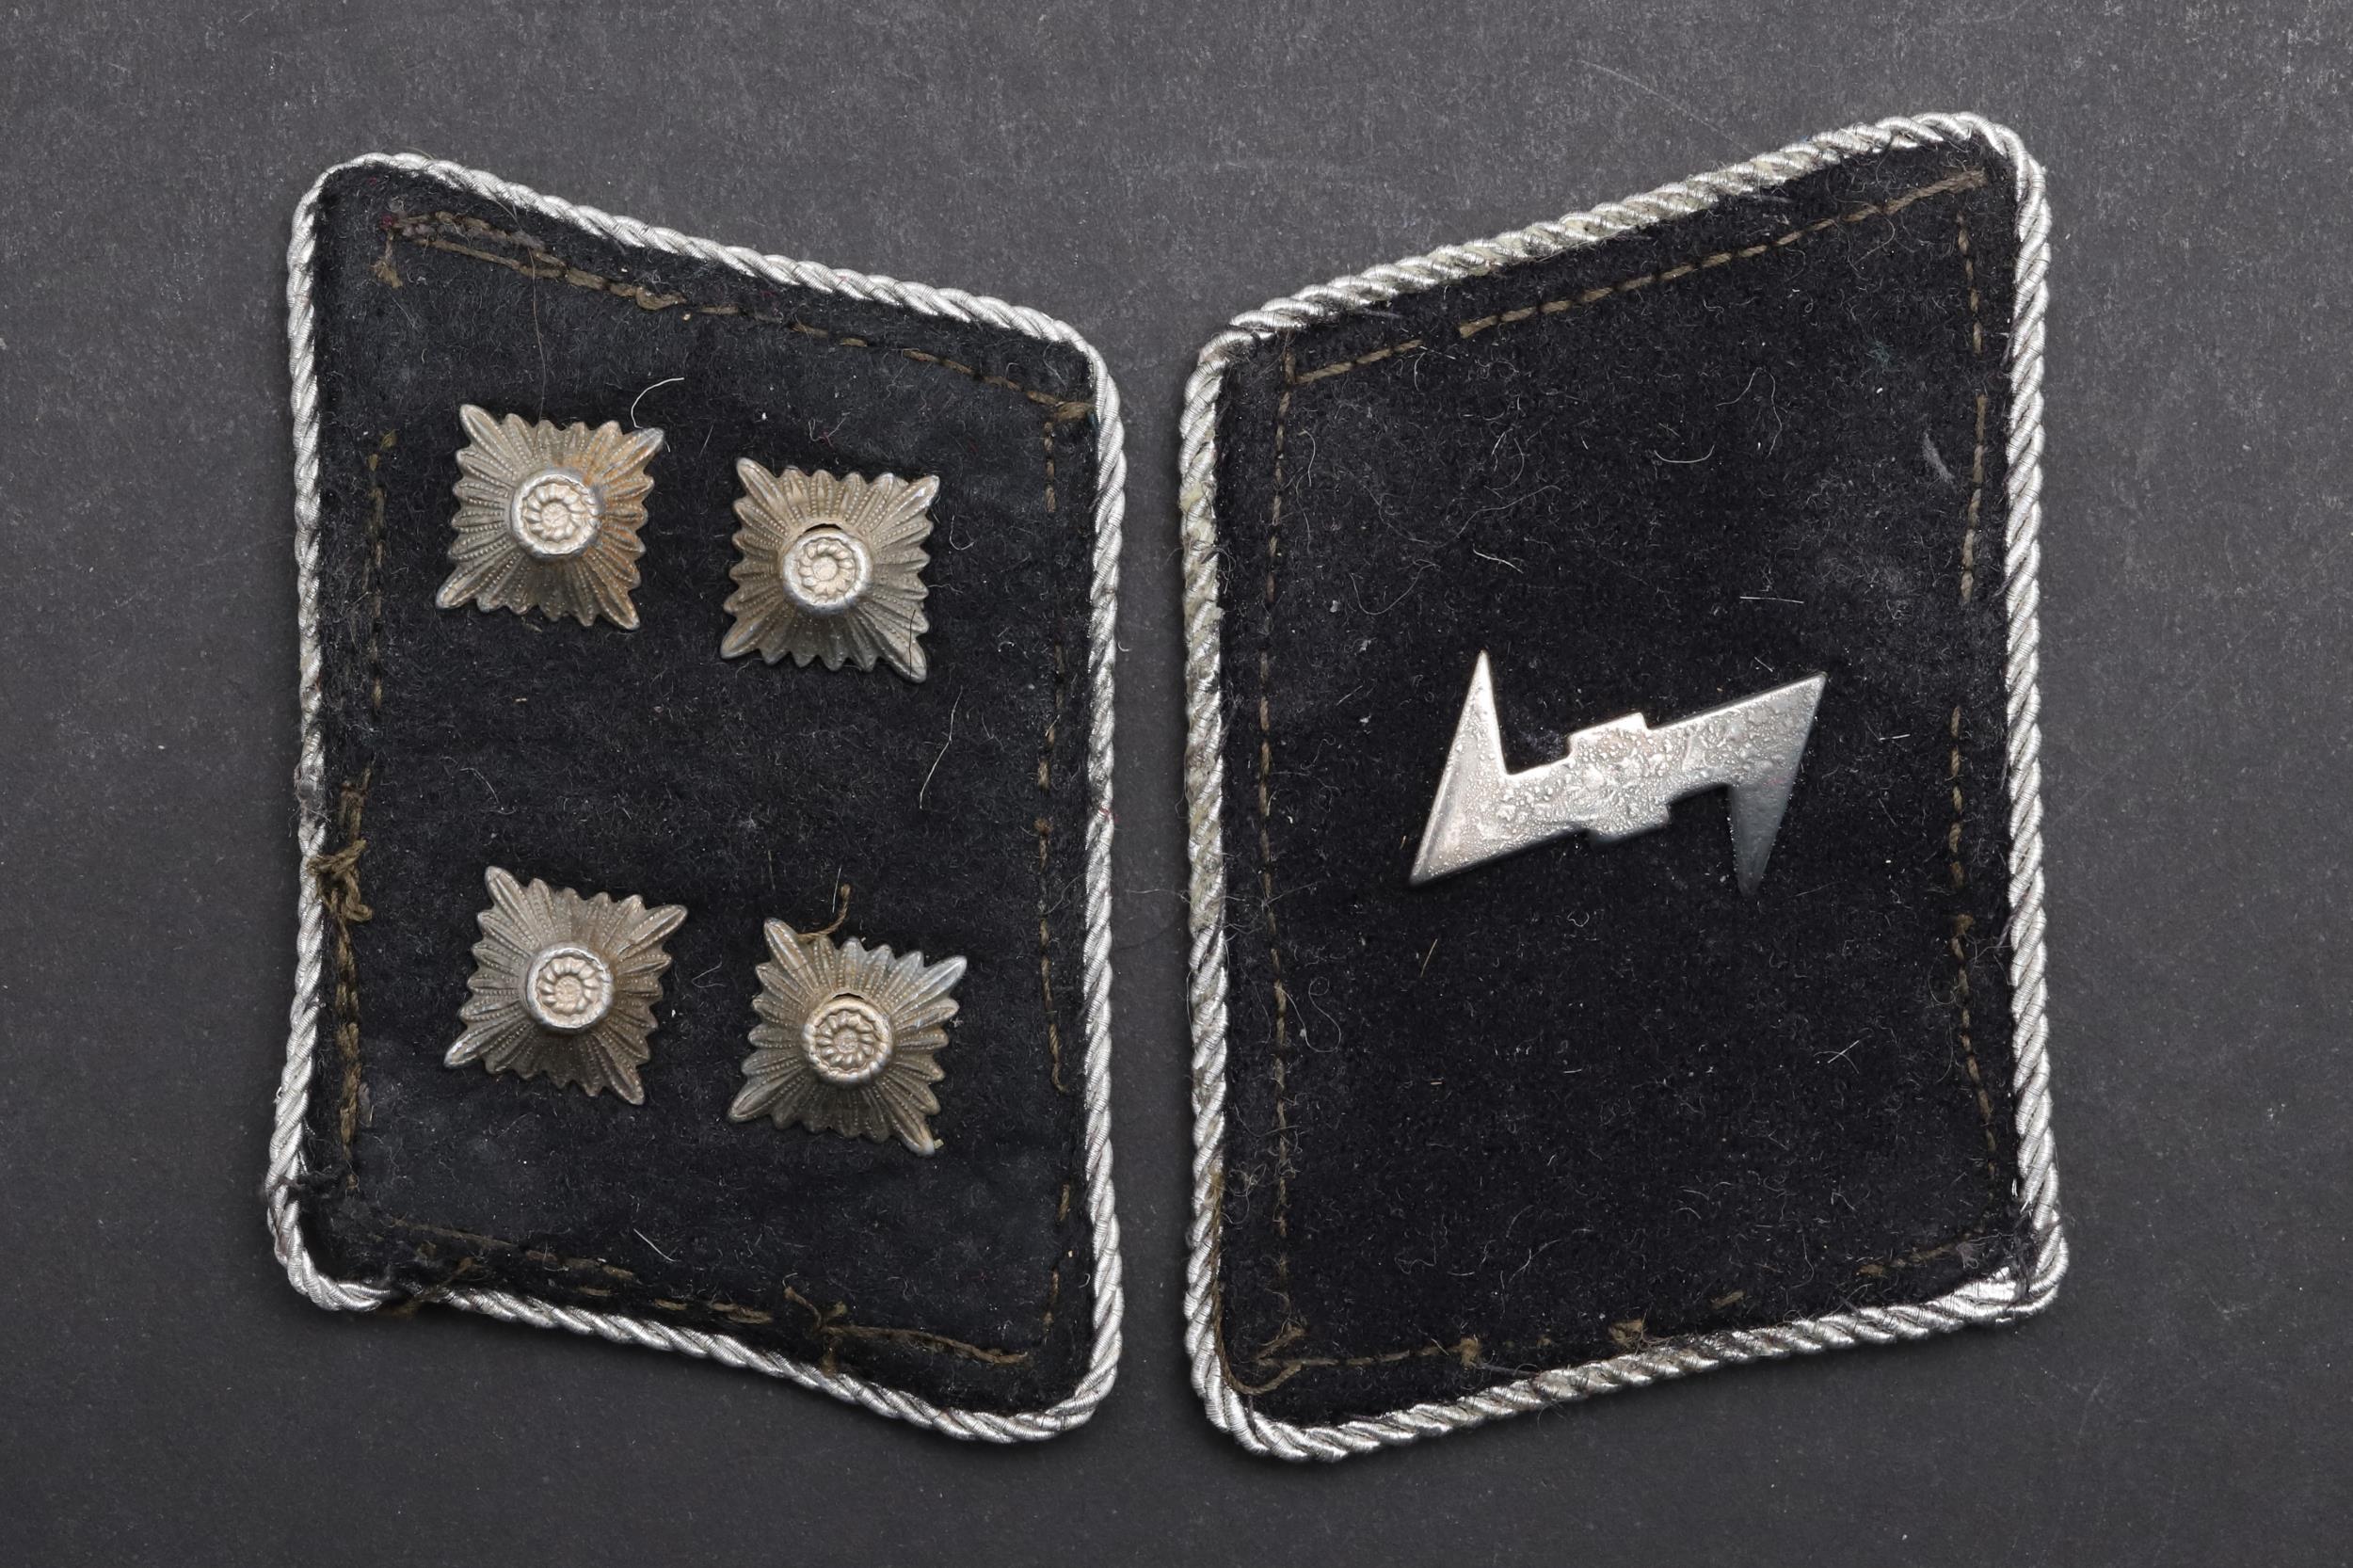 A PAIR OF SECOND WORLD WAR GERMAN SS OFFICER'S COLLAR PATCHES. - Image 2 of 3